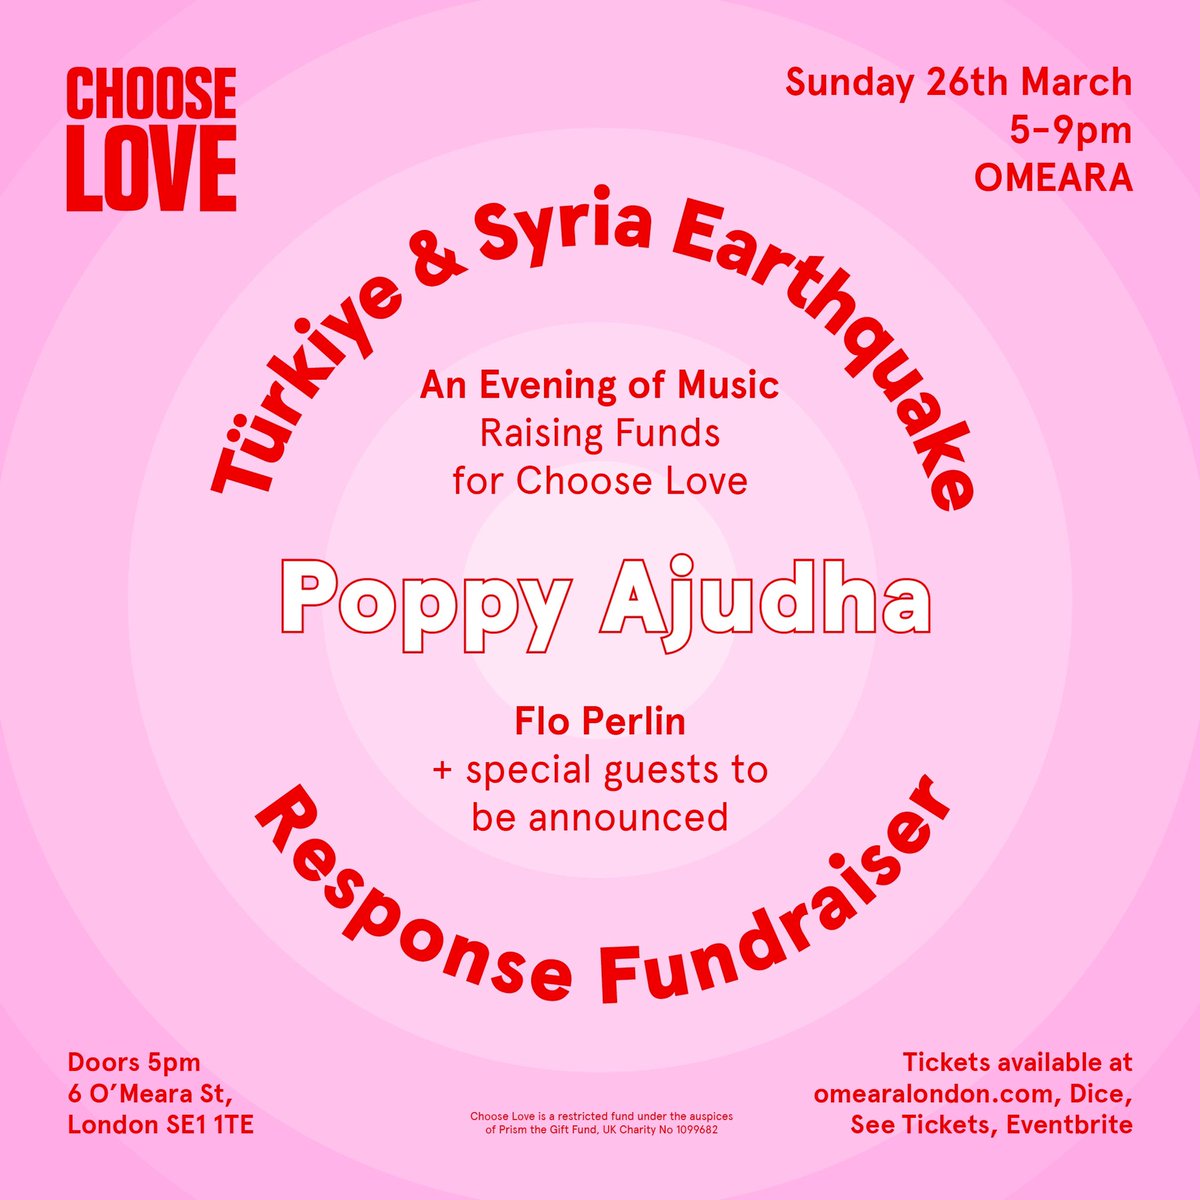 Say whaaat? I’ll be supporting @poppyajudha at this fundraising show for @chooselove earthquake response @omearalondon ! 100% of profits will raise crucial funds for choose love earthquake response. TICKETS IN BIO #chooseloveandmusic